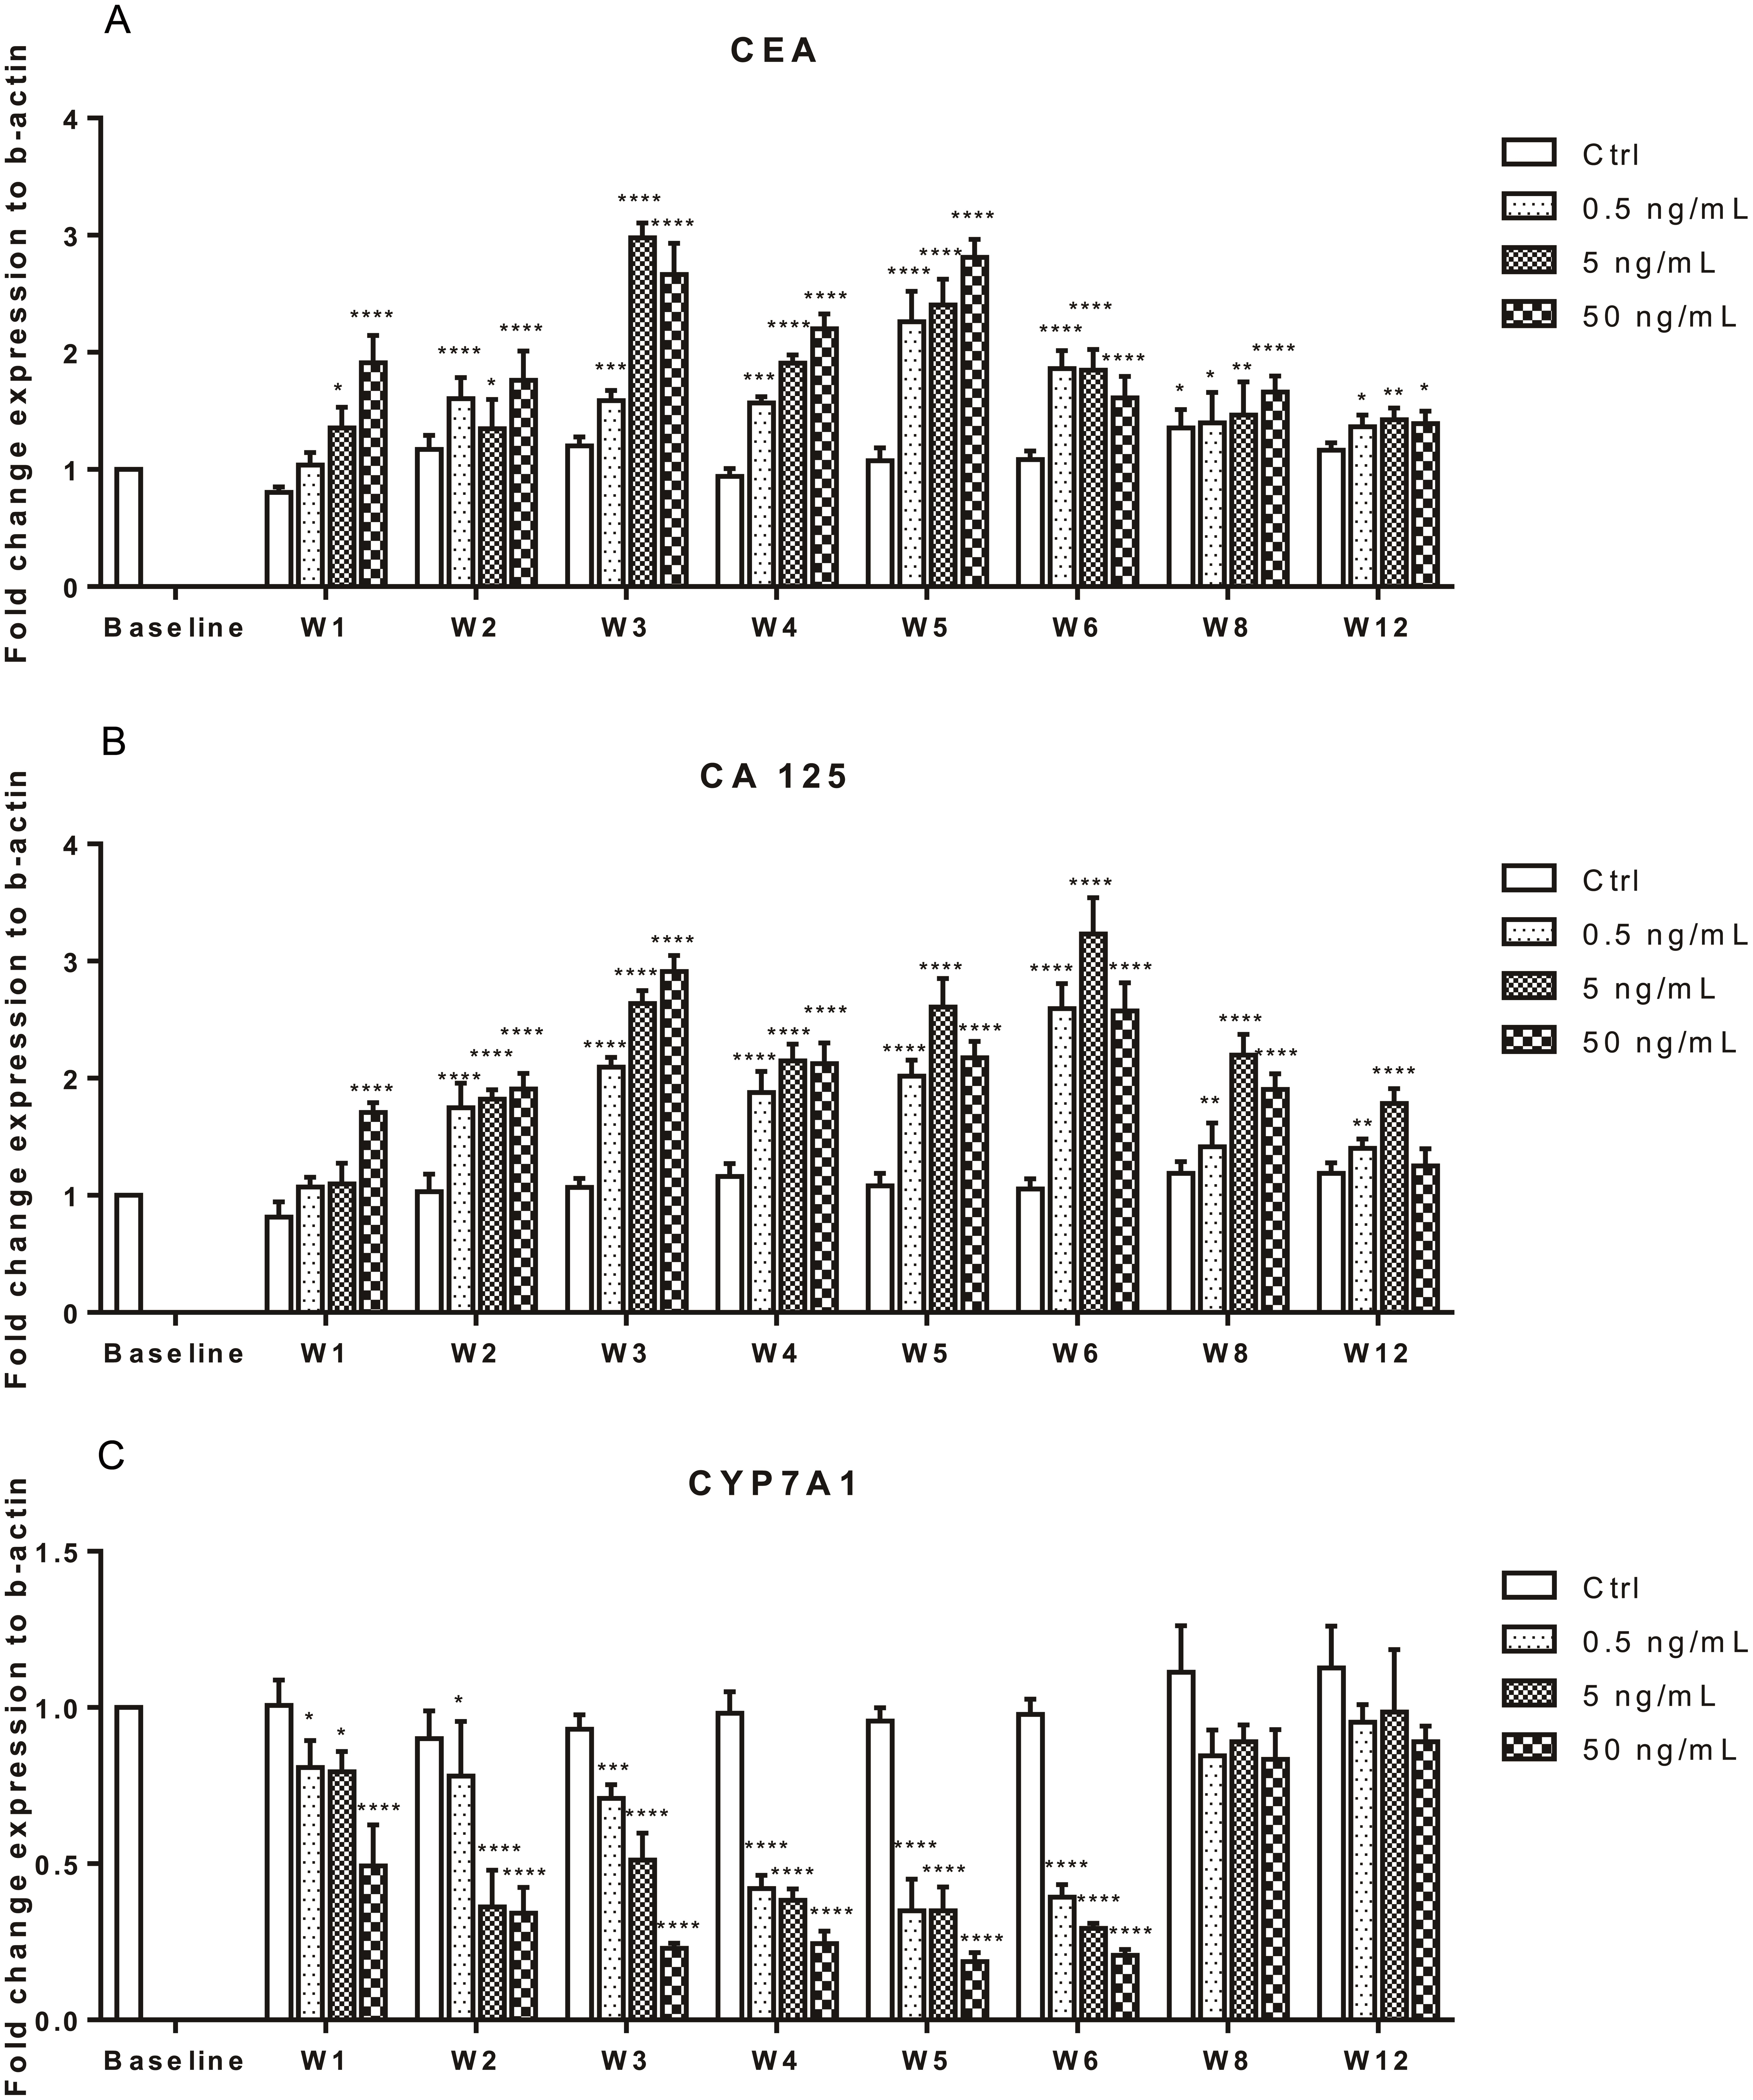 Effects of FGF19 exposure on H69 cholangiocyte differentiation as determined by CEA (A), CA125 (B) and CYP7A1 (C) expression.